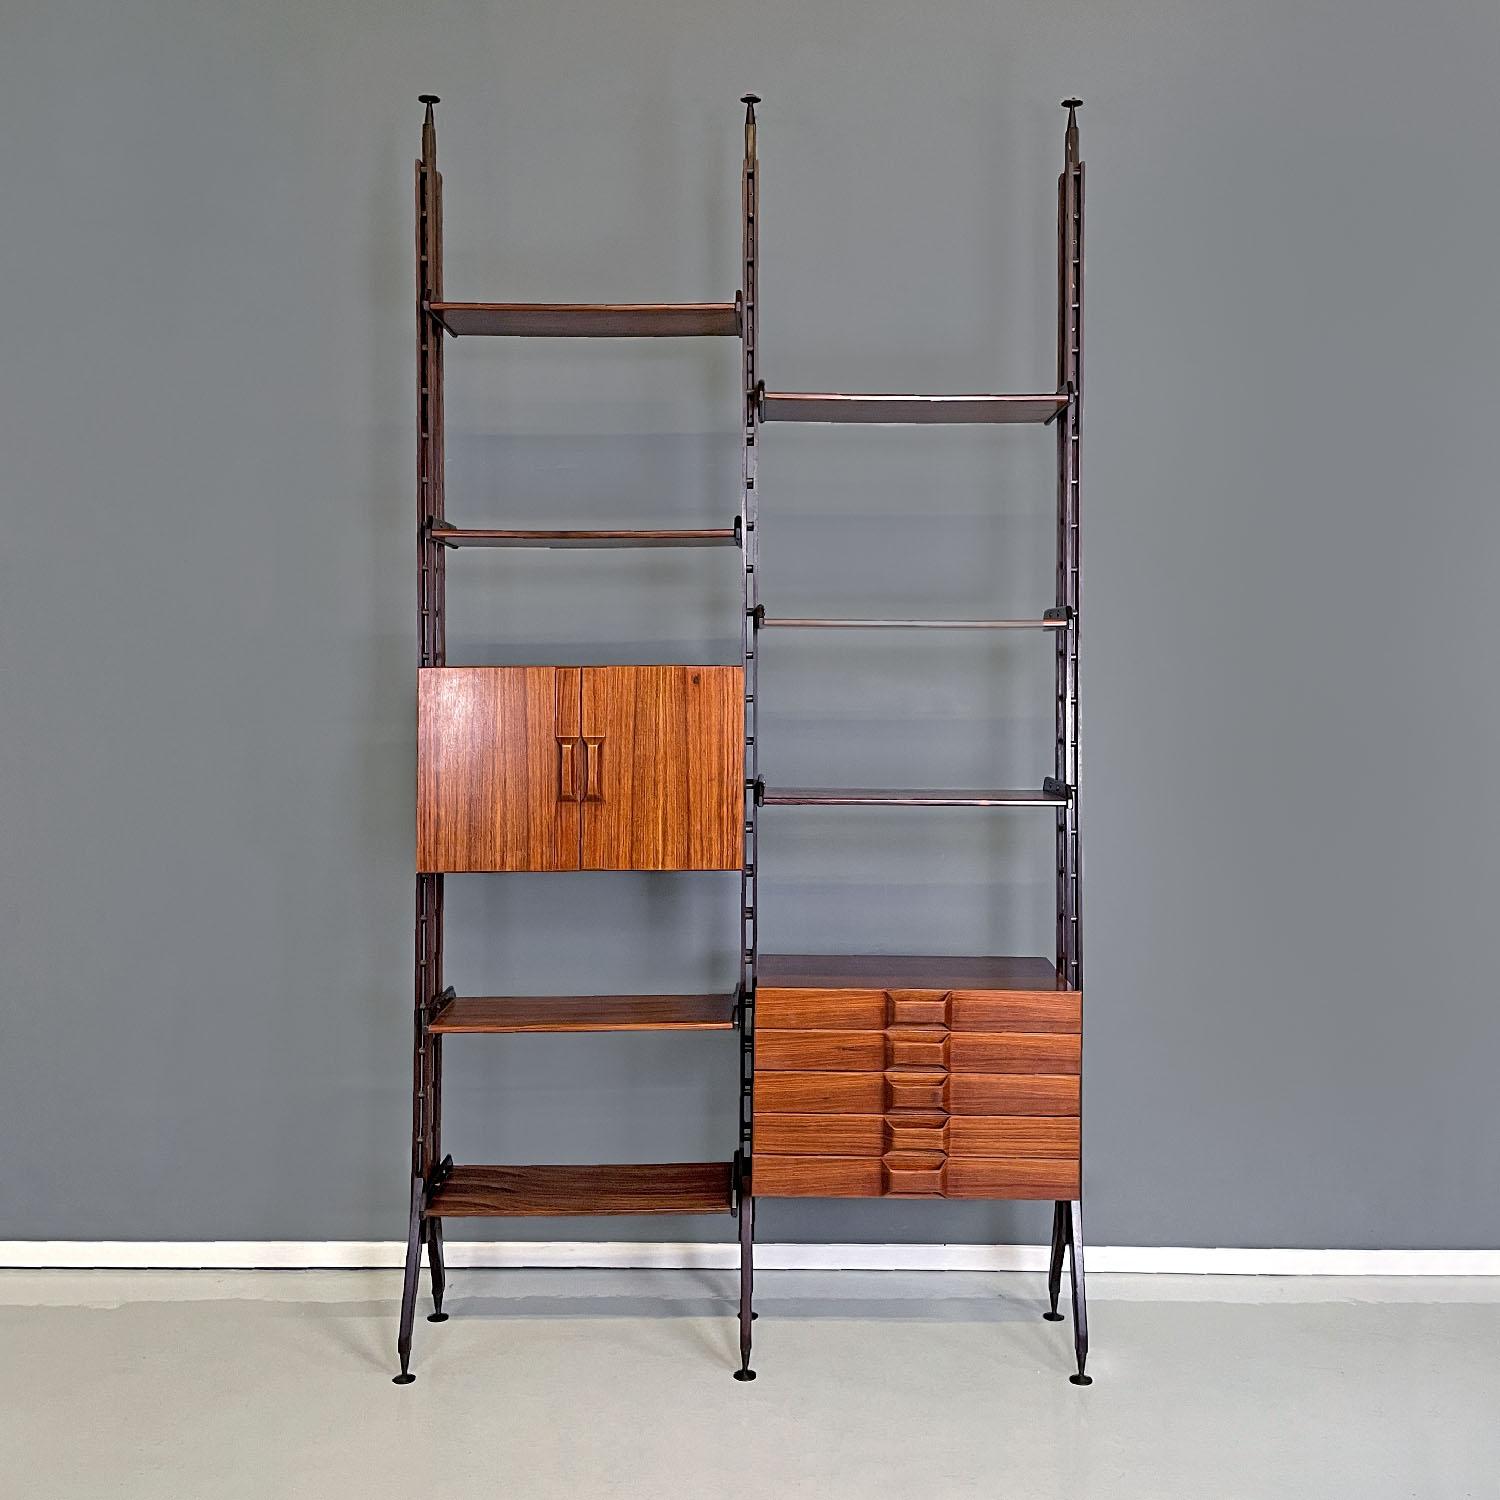 Italian mid-century modern floor-to-ceiling wood and brass bookcase, 1960s
Free-standing bookcase with wooden and brass structure, composed of two spans. Inside the uprights there are brass tracks that allow you to arrange the two modules and the